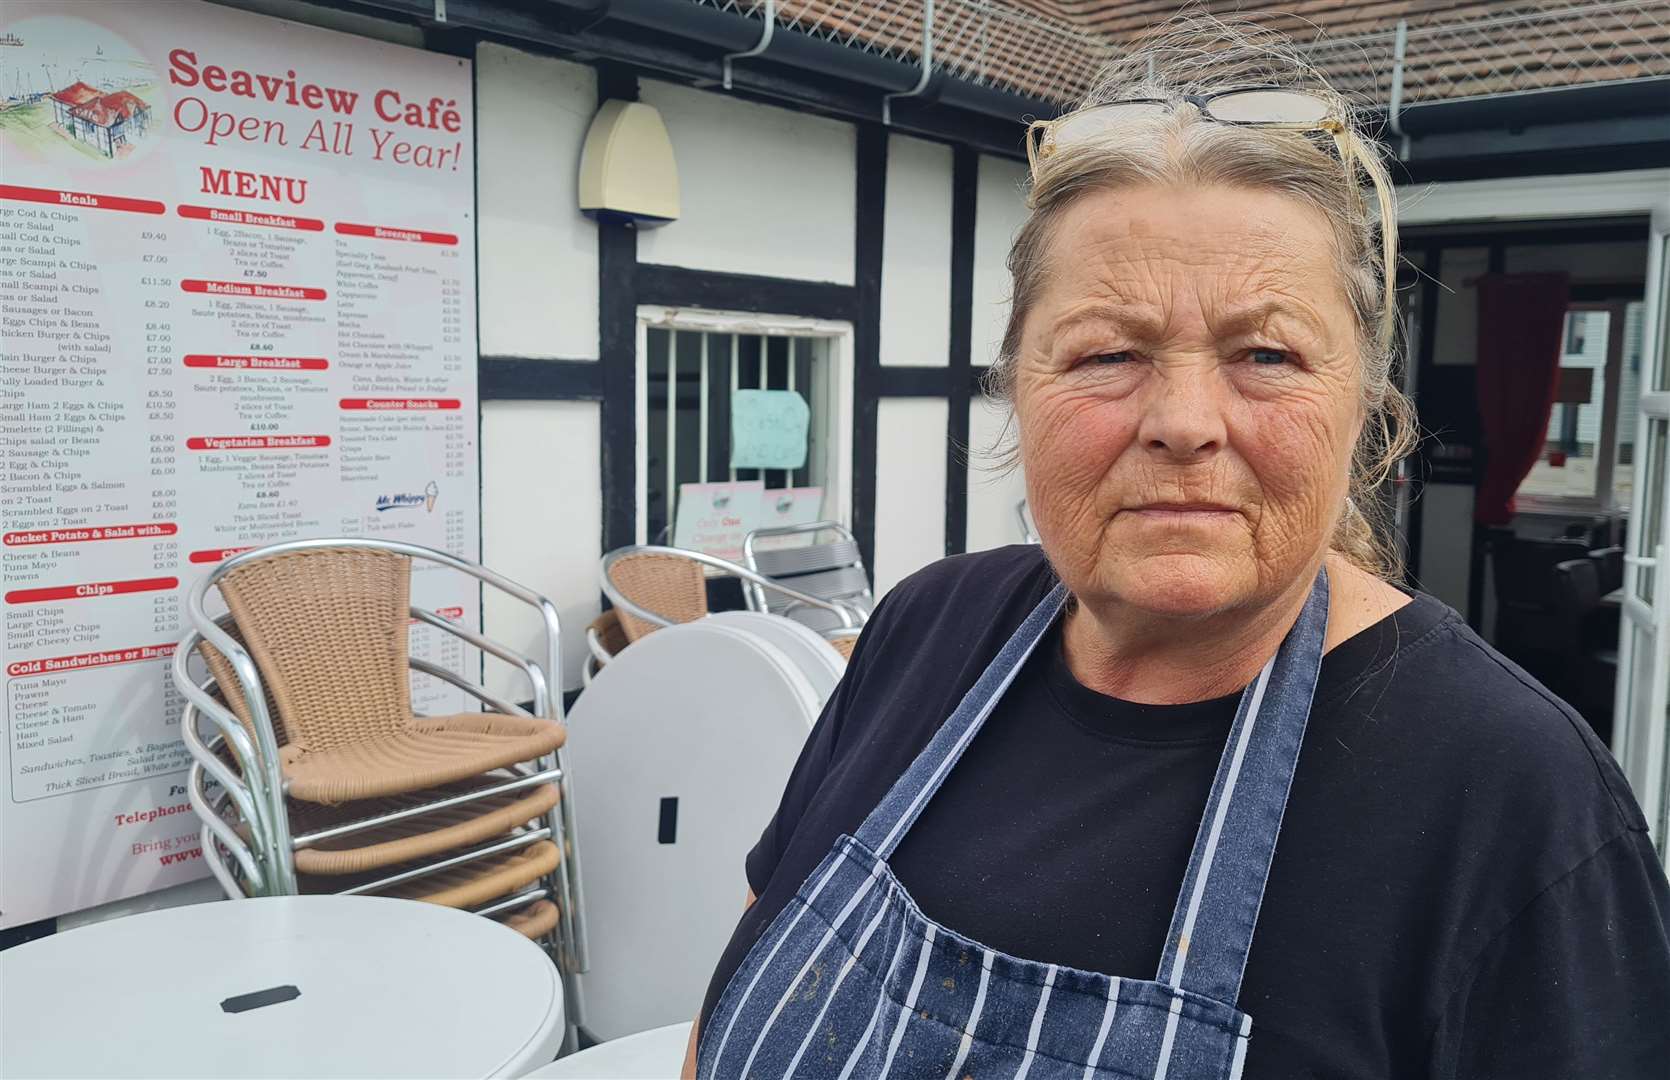 Tankerton Seaview Cafe owner Deborah Clarke feared she could have lost business, as a result of the blunder